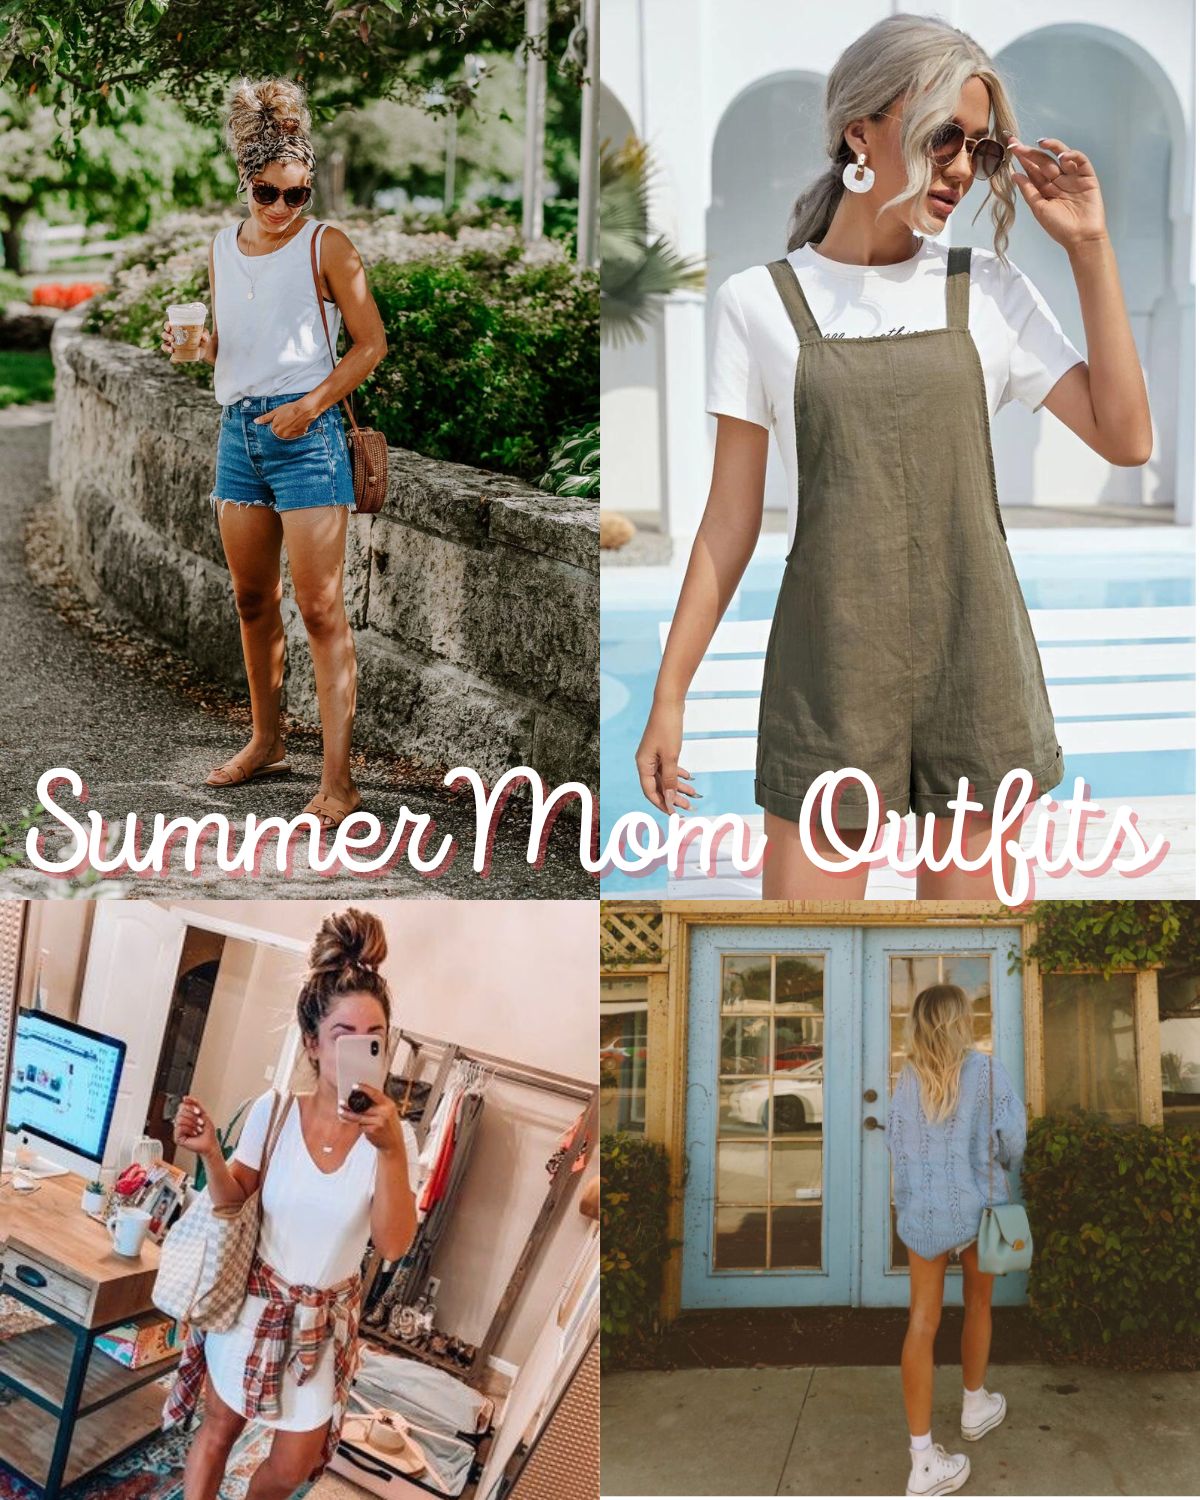 Four summer outfits that are simple